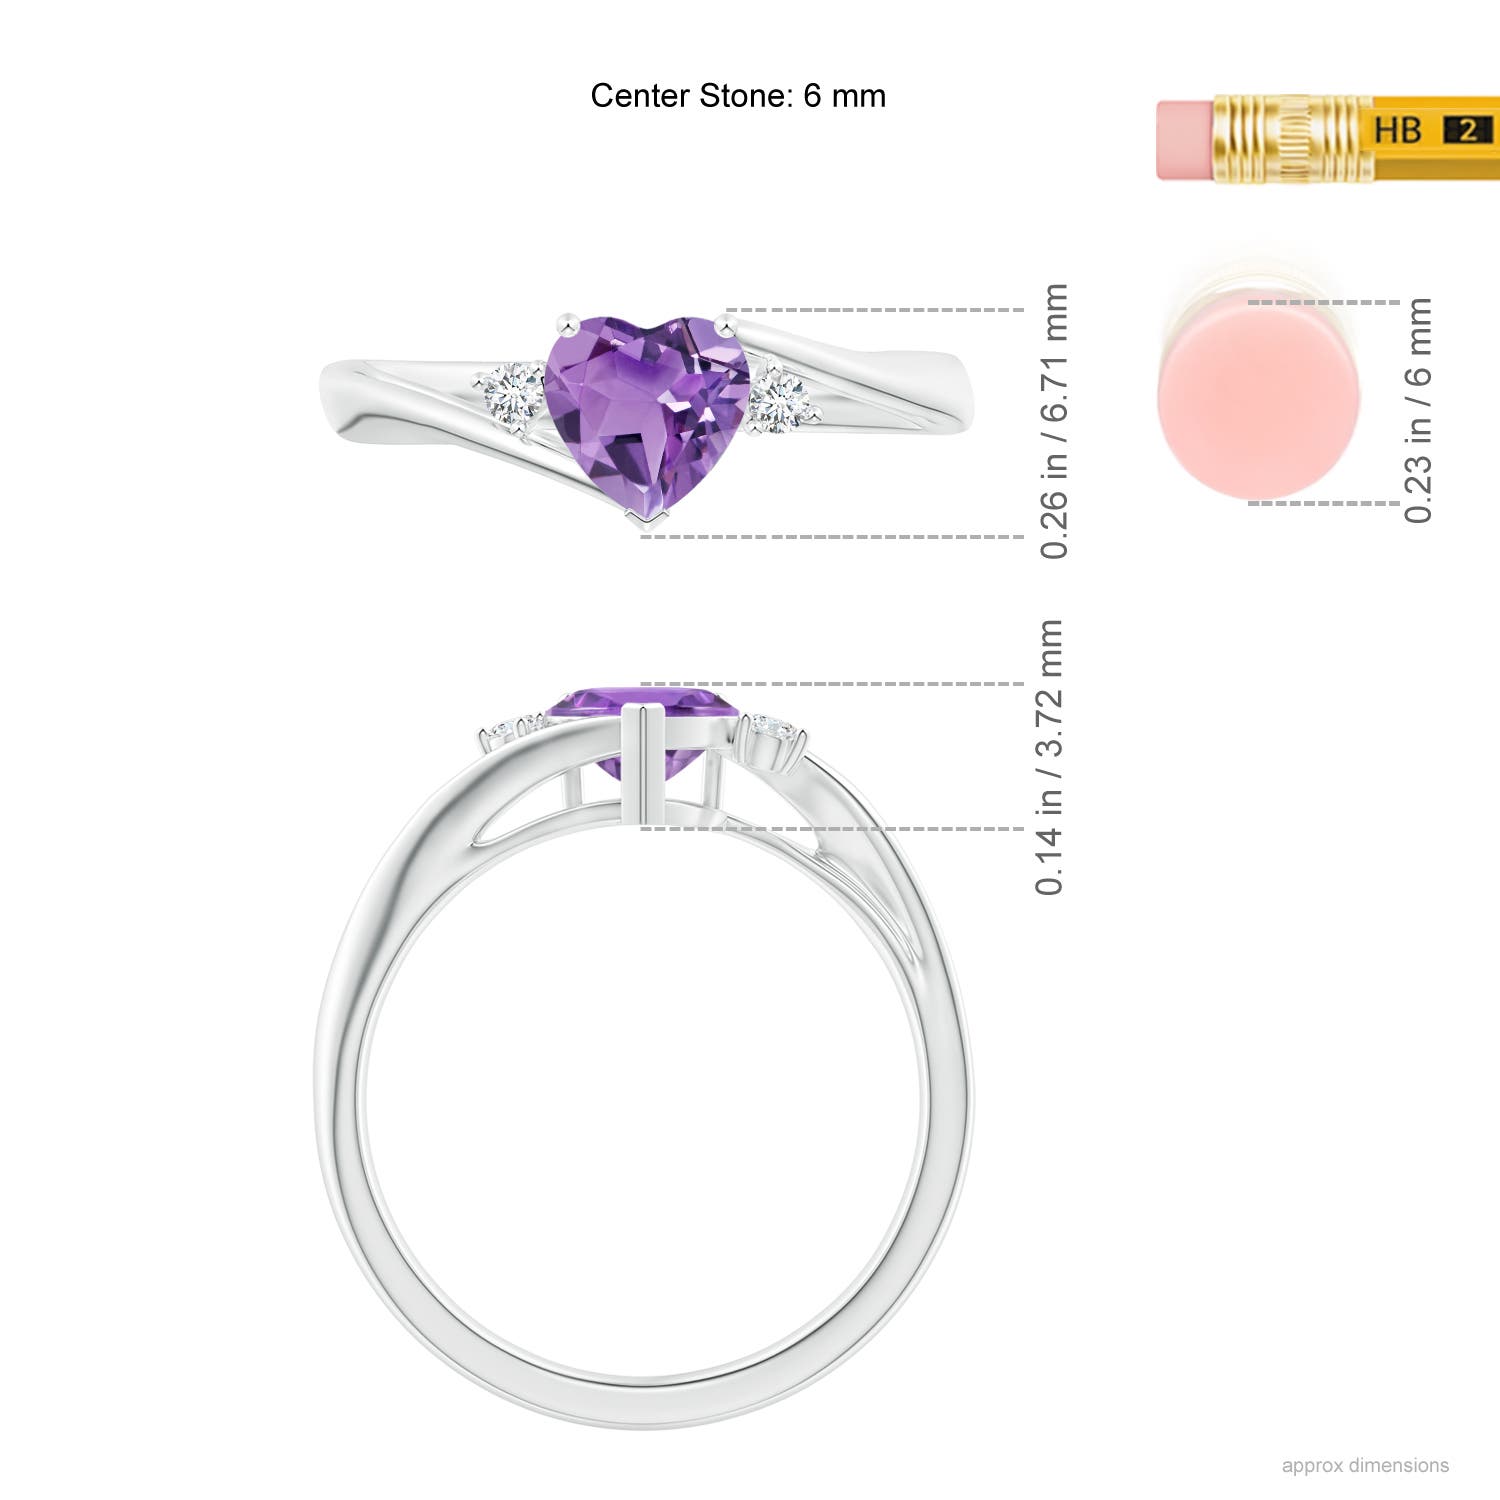 A - Amethyst / 0.75 CT / 14 KT White Gold